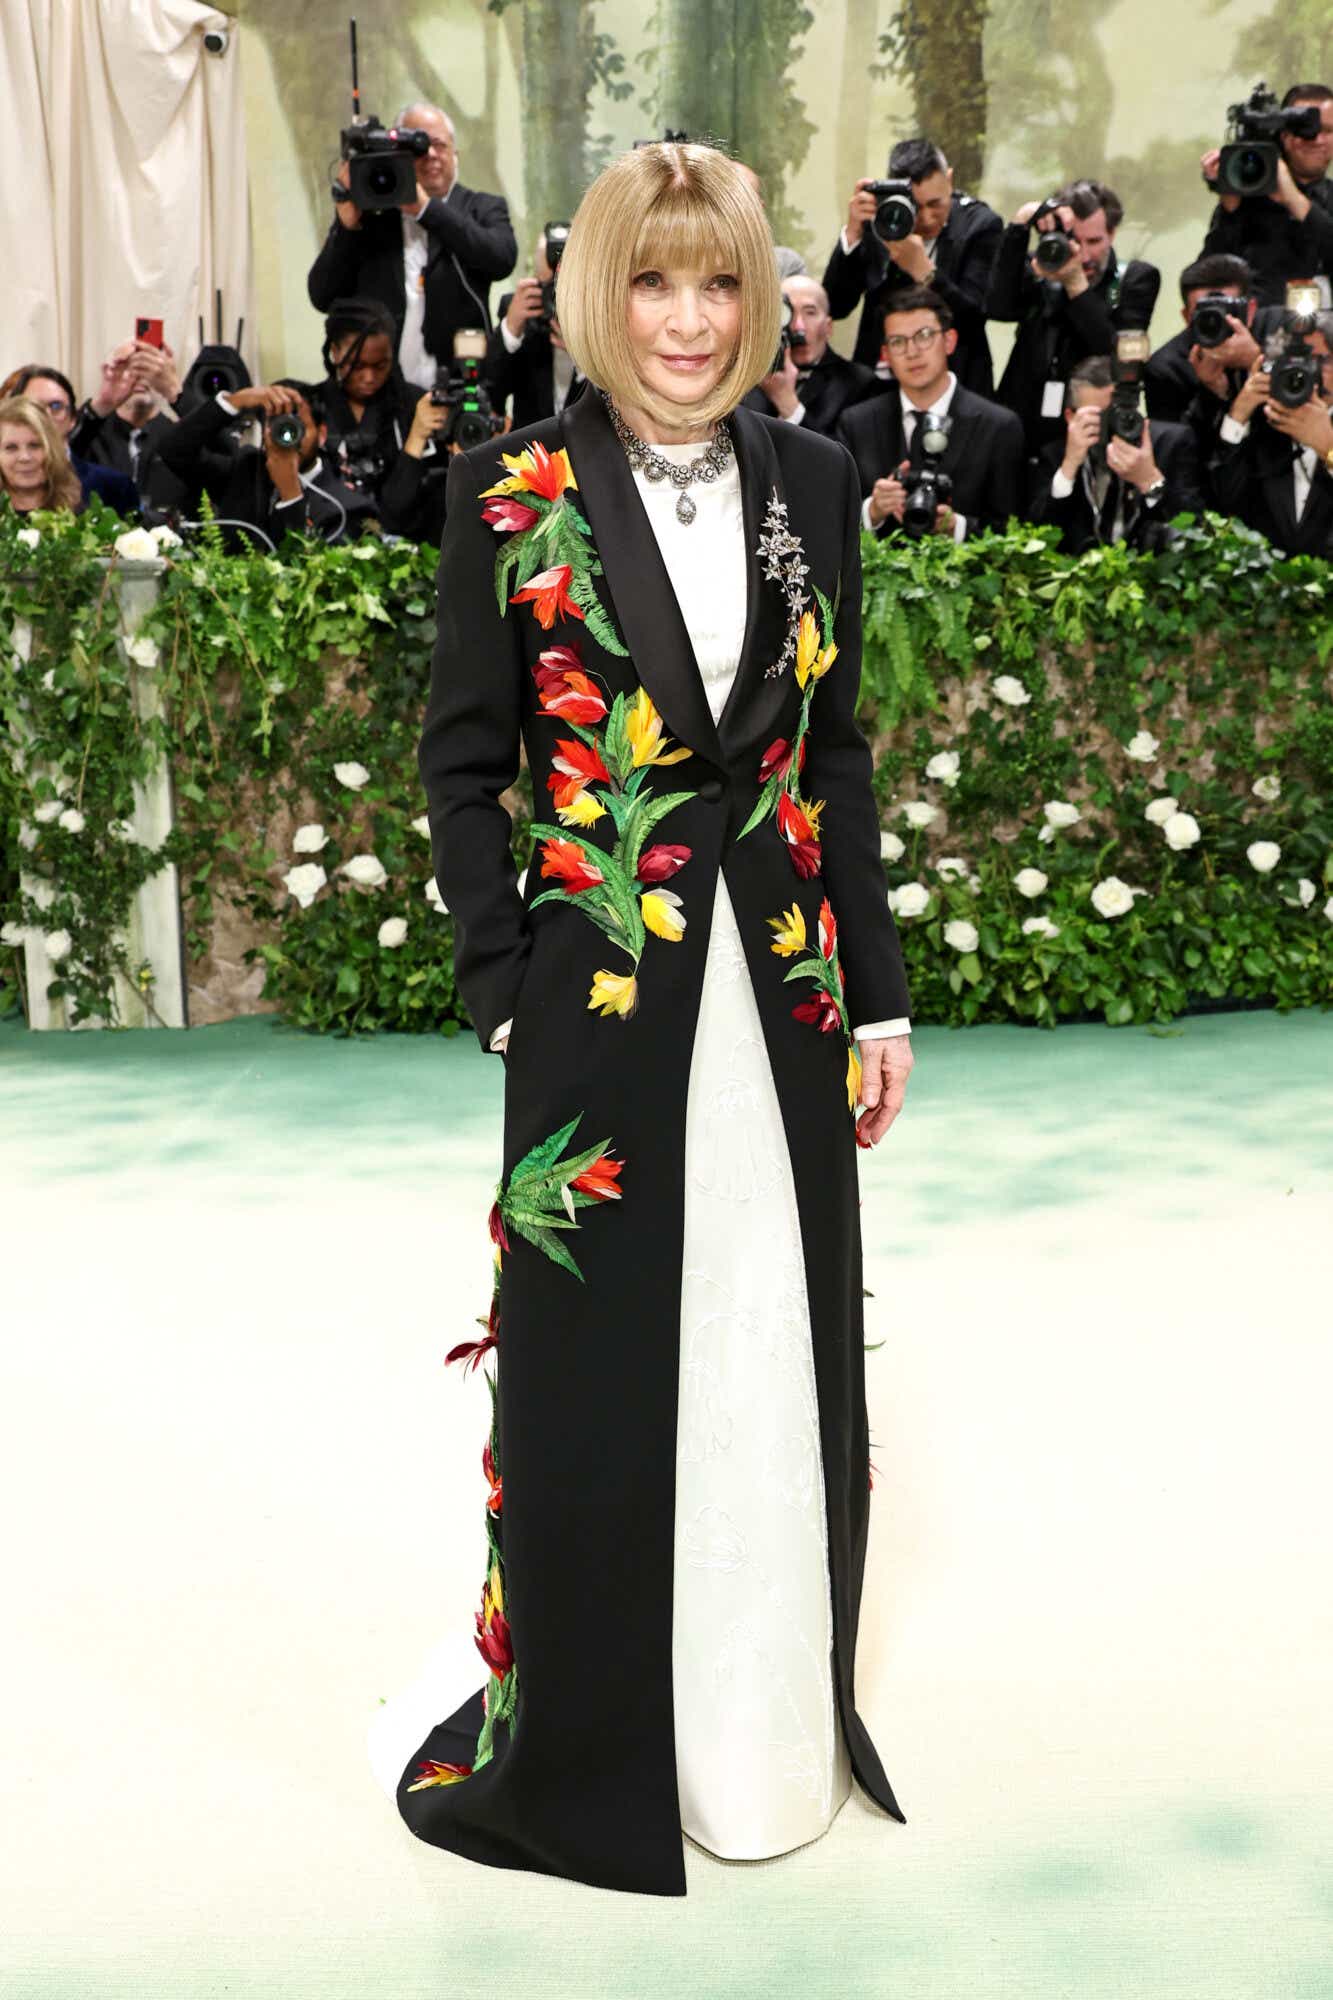 Anna Wintour wears a white gown with a long black tuxedo jacket over it, adorned with red and yellow tulips.